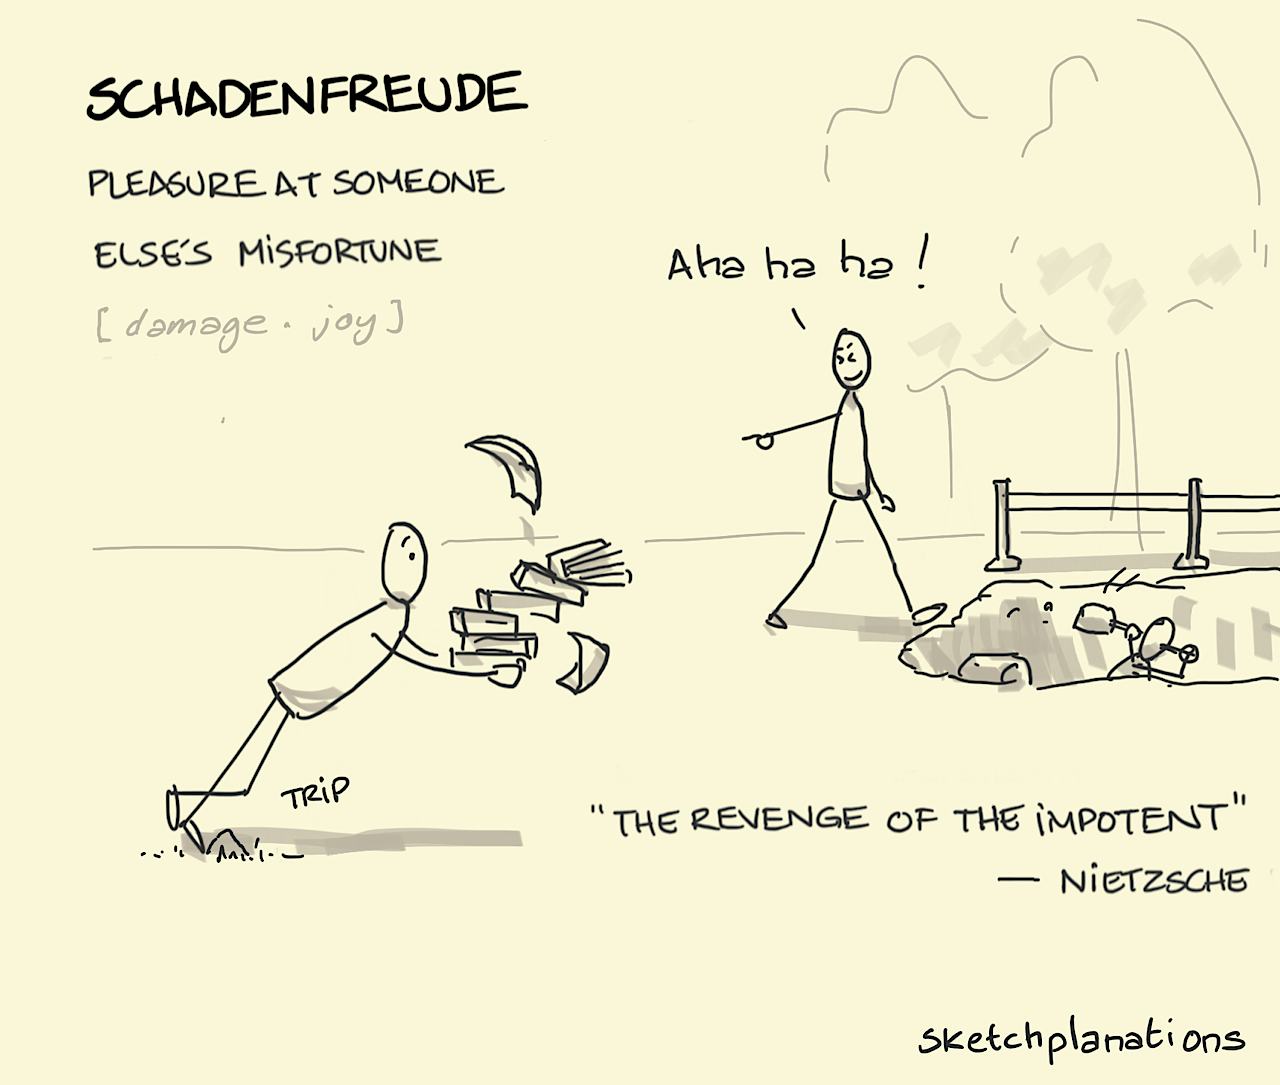 Schadenfreude illustration: pleasure at someone tripping's misfortune right before they fall in hole